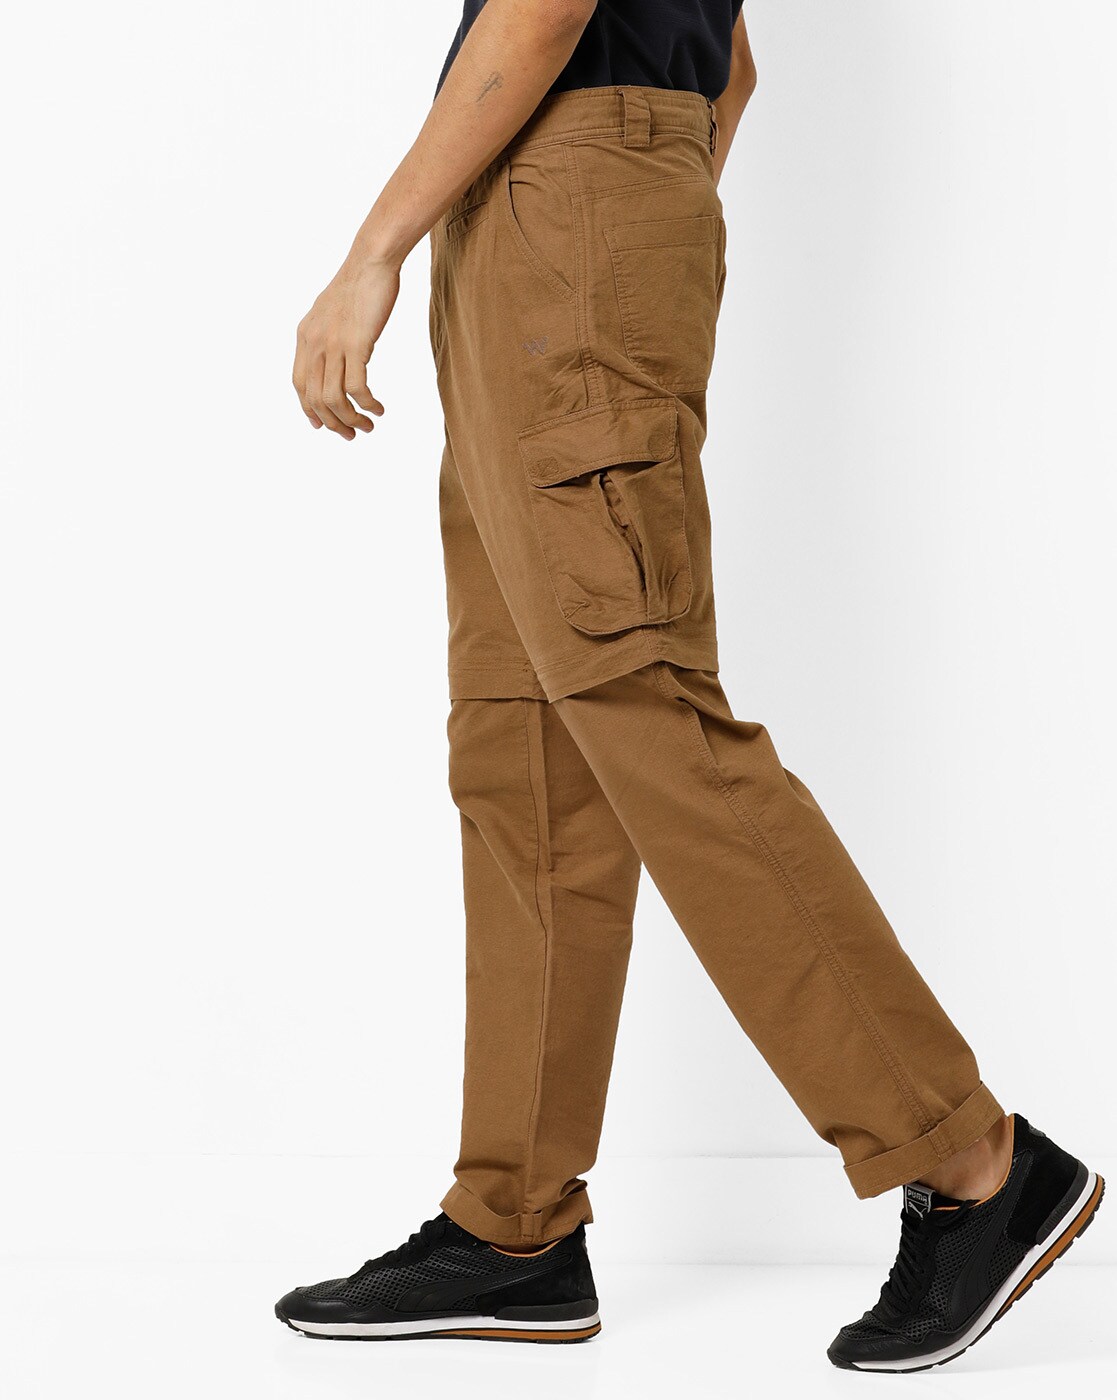 Best Hiking Pants for Men of 2023